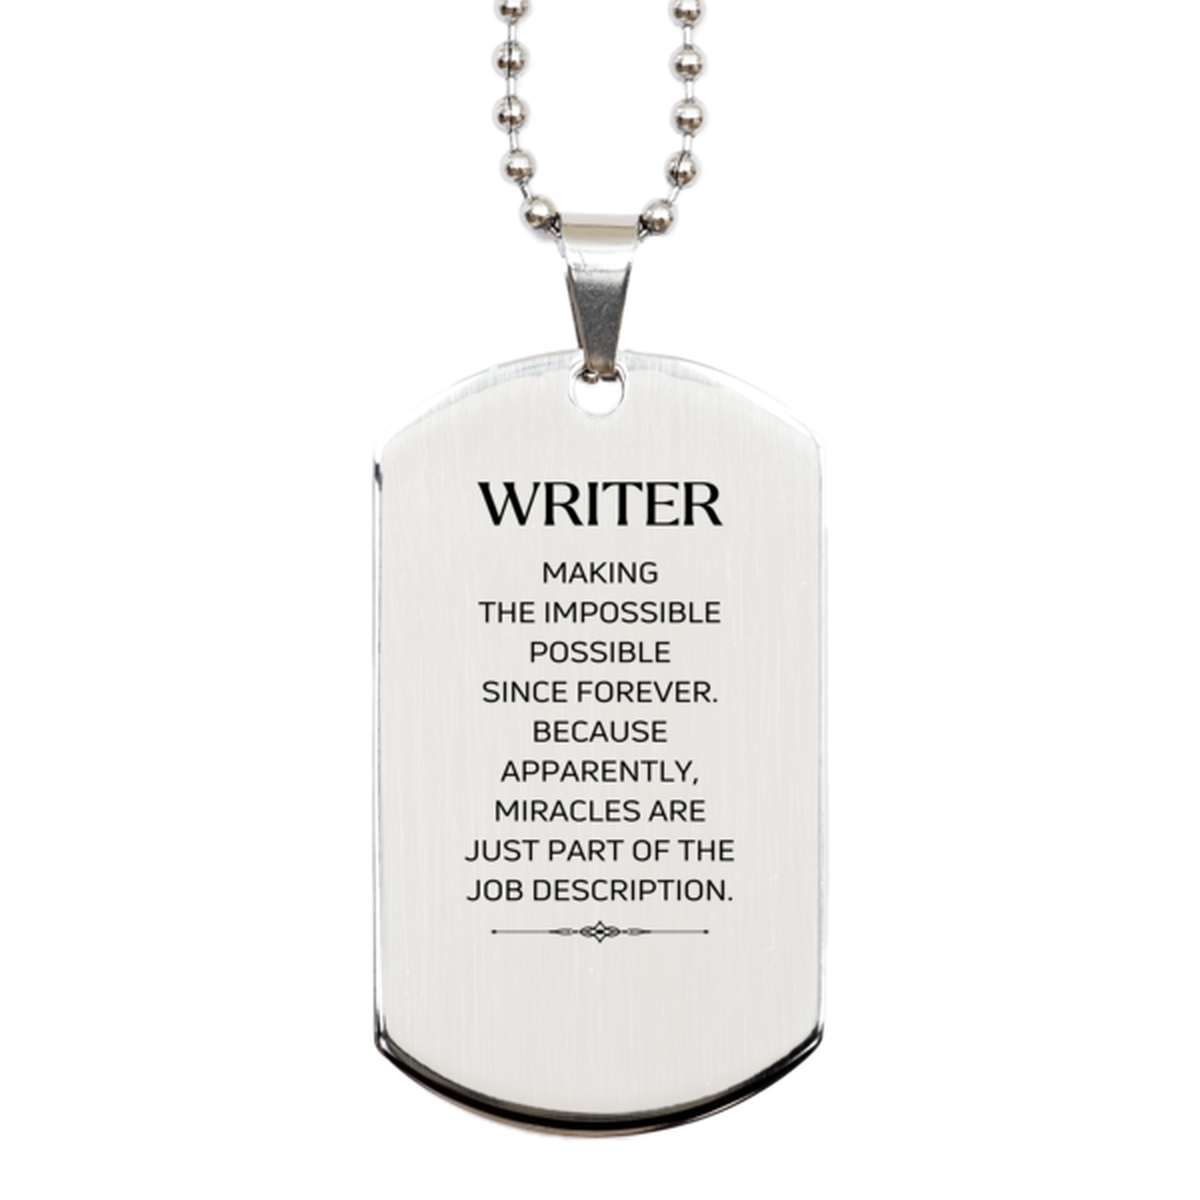 Funny Writer Gifts, Miracles are just part of the job description, Inspirational Birthday Silver Dog Tag For Writer, Men, Women, Coworkers, Friends, Boss